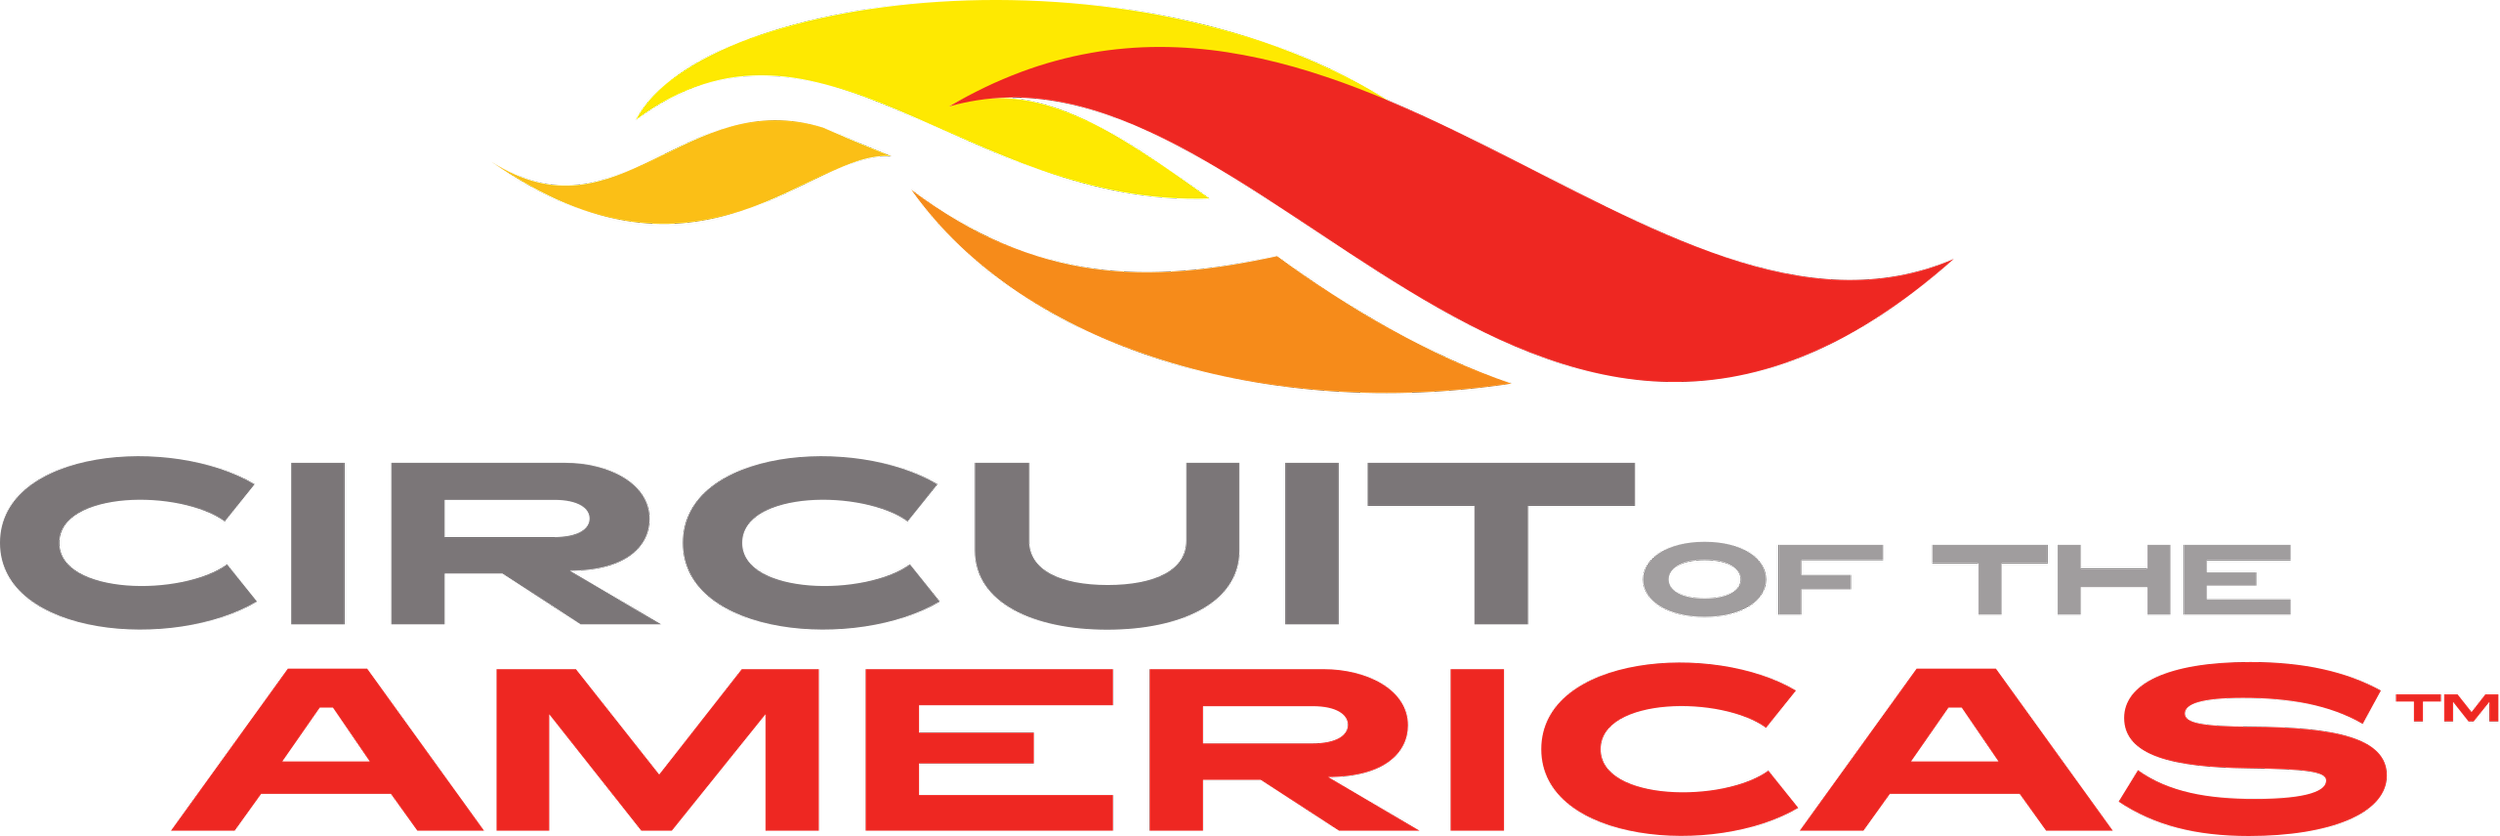 Circuit_of_the_Americas_logo.svg.png